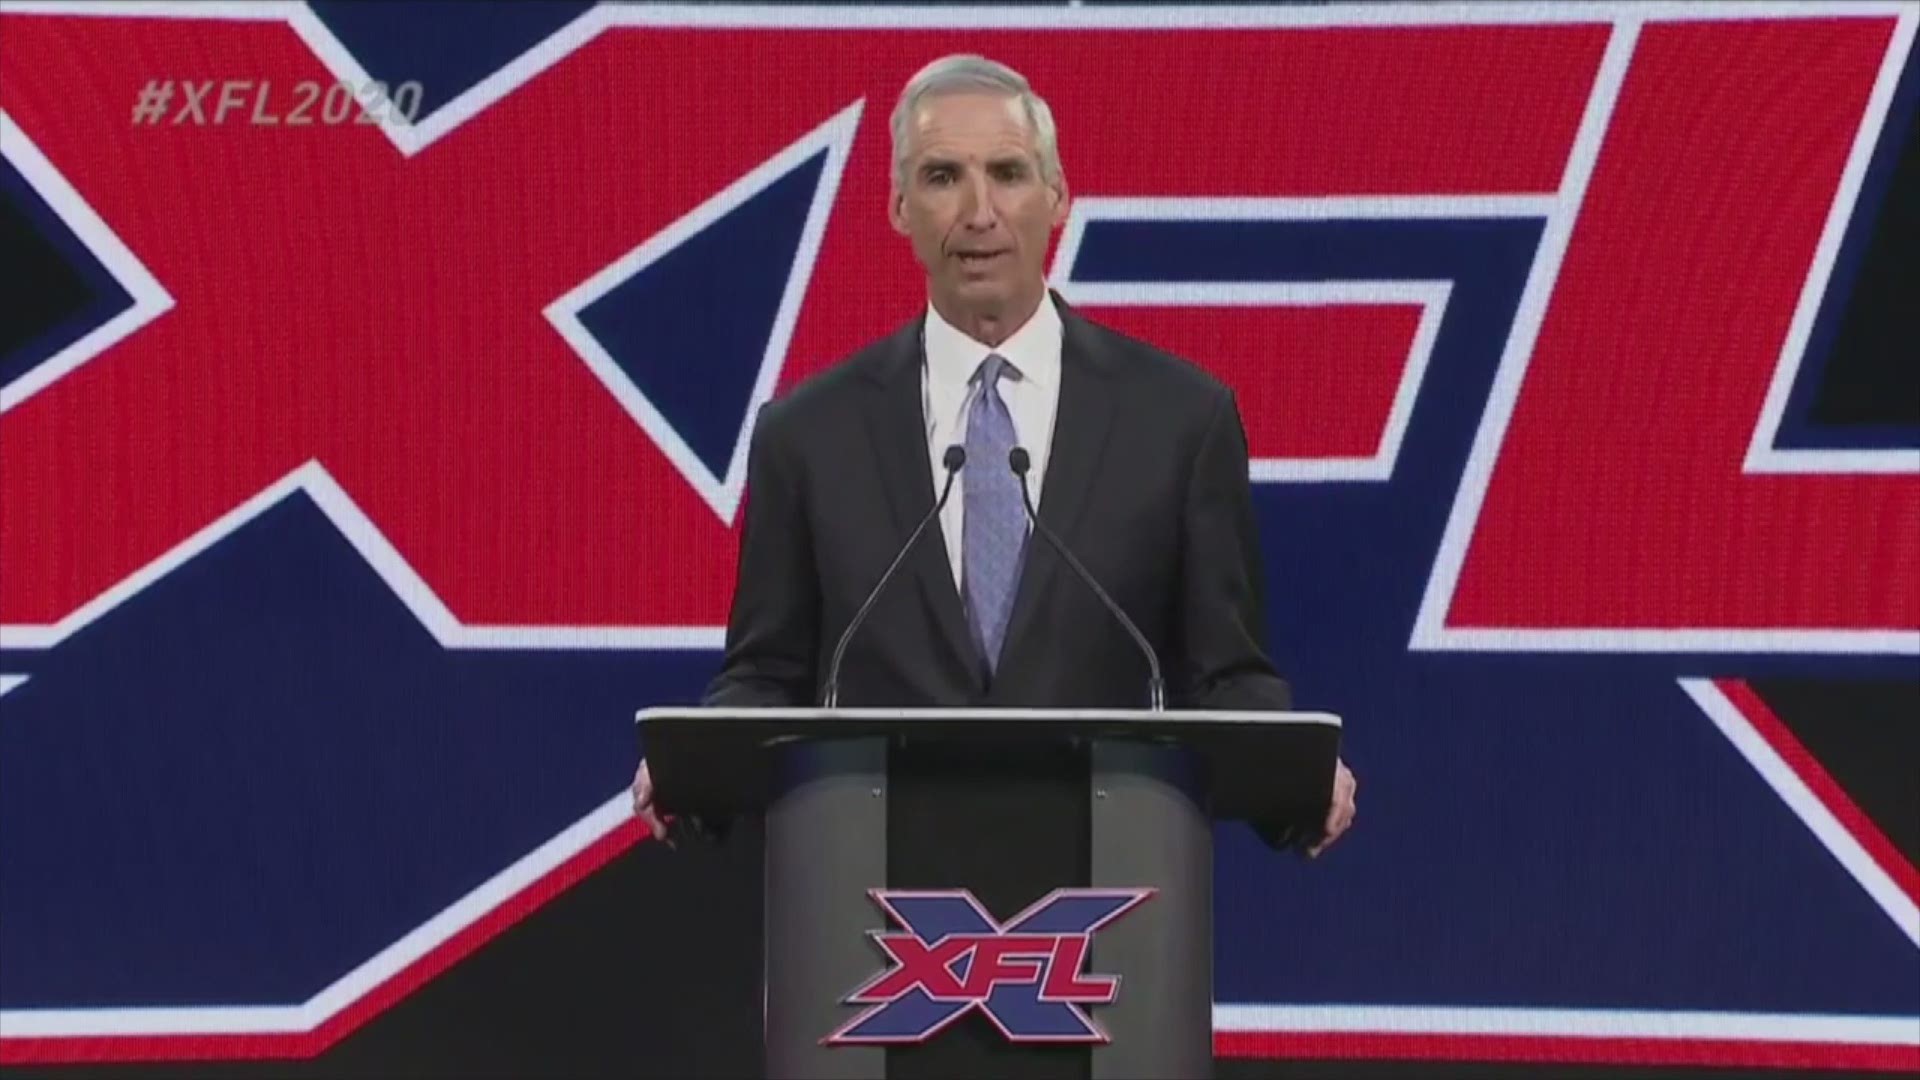 Watch the official announcement that Globe Life Park is slated to be the home stadium of an XFL team starting in 2020. Video: XFL